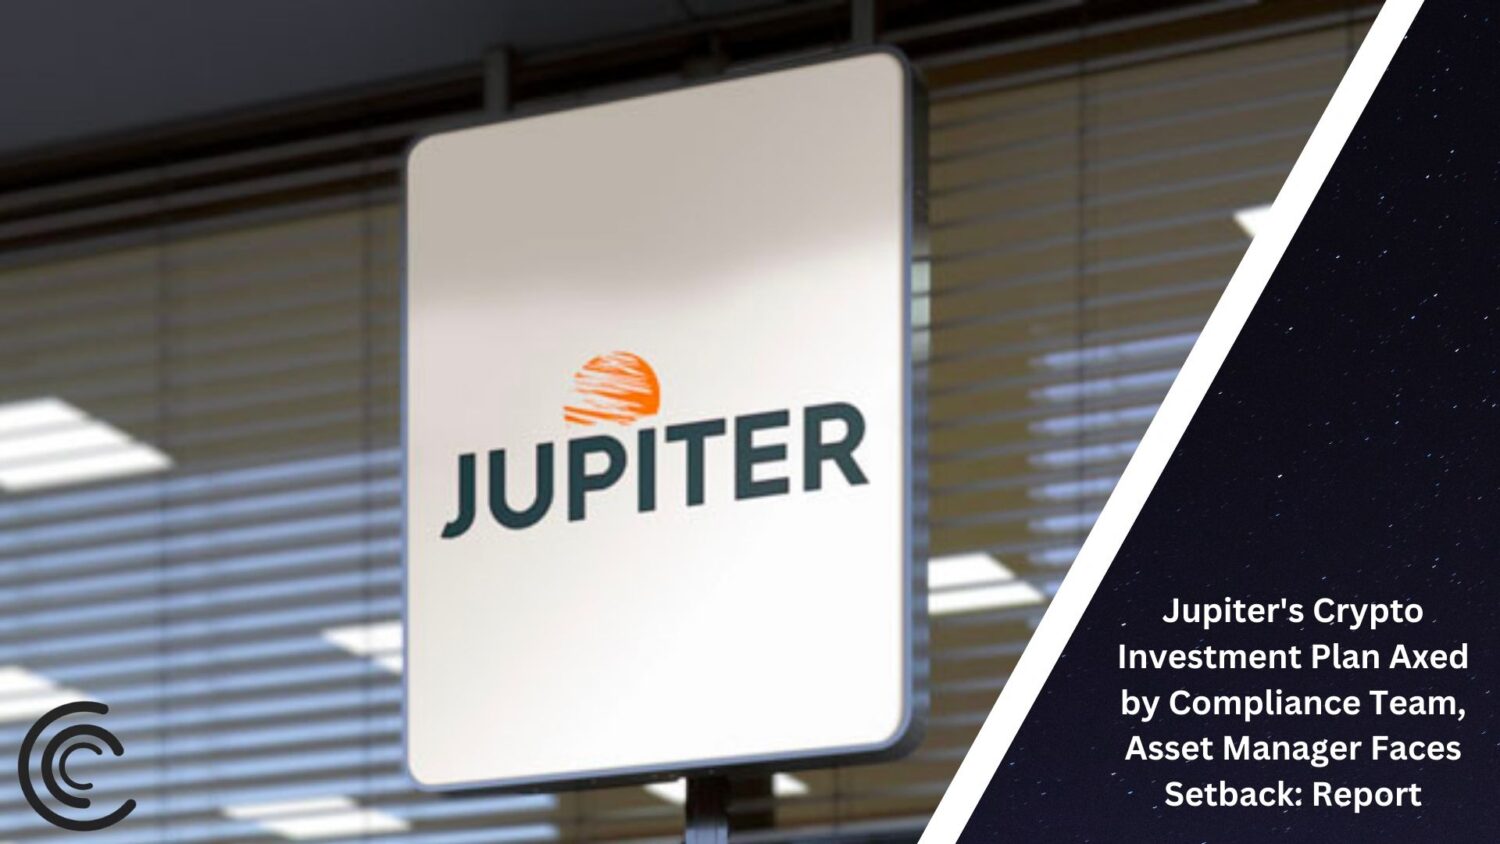 Jupiter'S Crypto Investment Plan Axed By Compliance Team, Asset Manager Faces Setback: Report